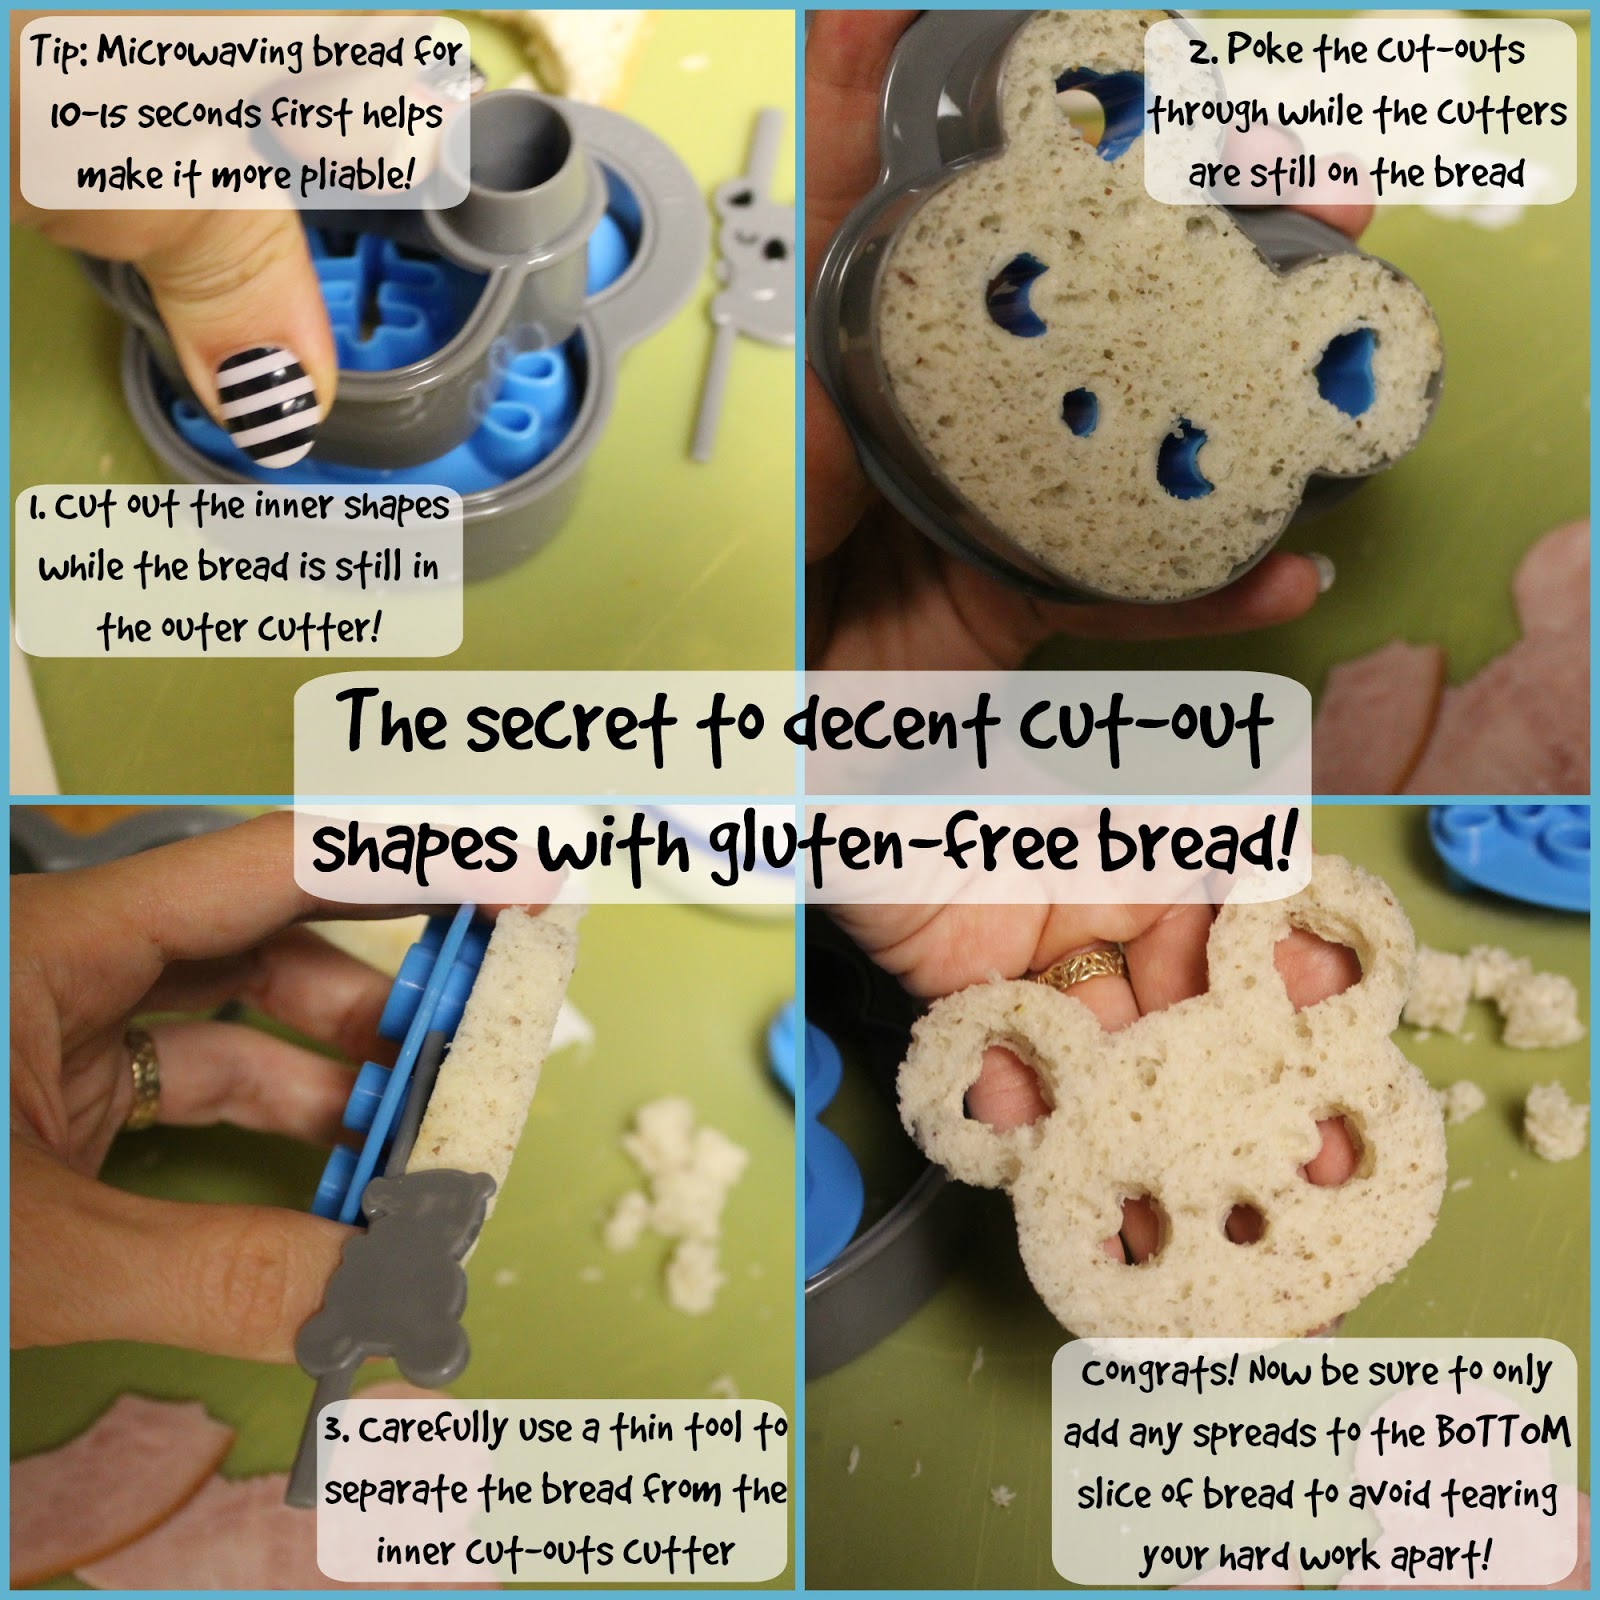 How to use CuteZCute cut-out cutters on gluten-free bread without it falling apart!